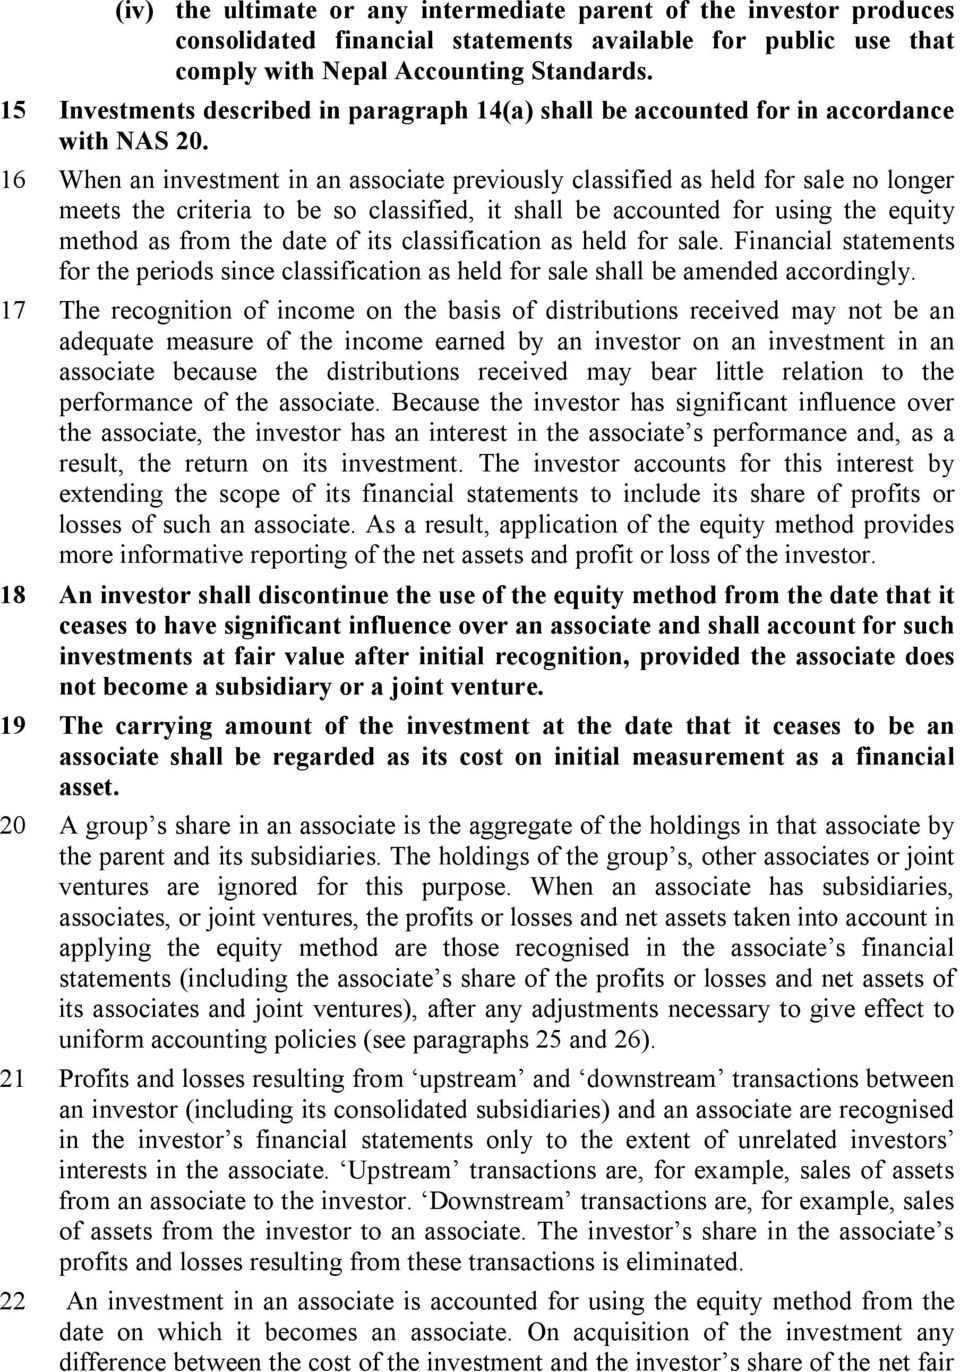 16 When an investment in an associate previously classified as held for sale no longer meets the criteria to be so classified, it shall be accounted for using the equity method as from the date of